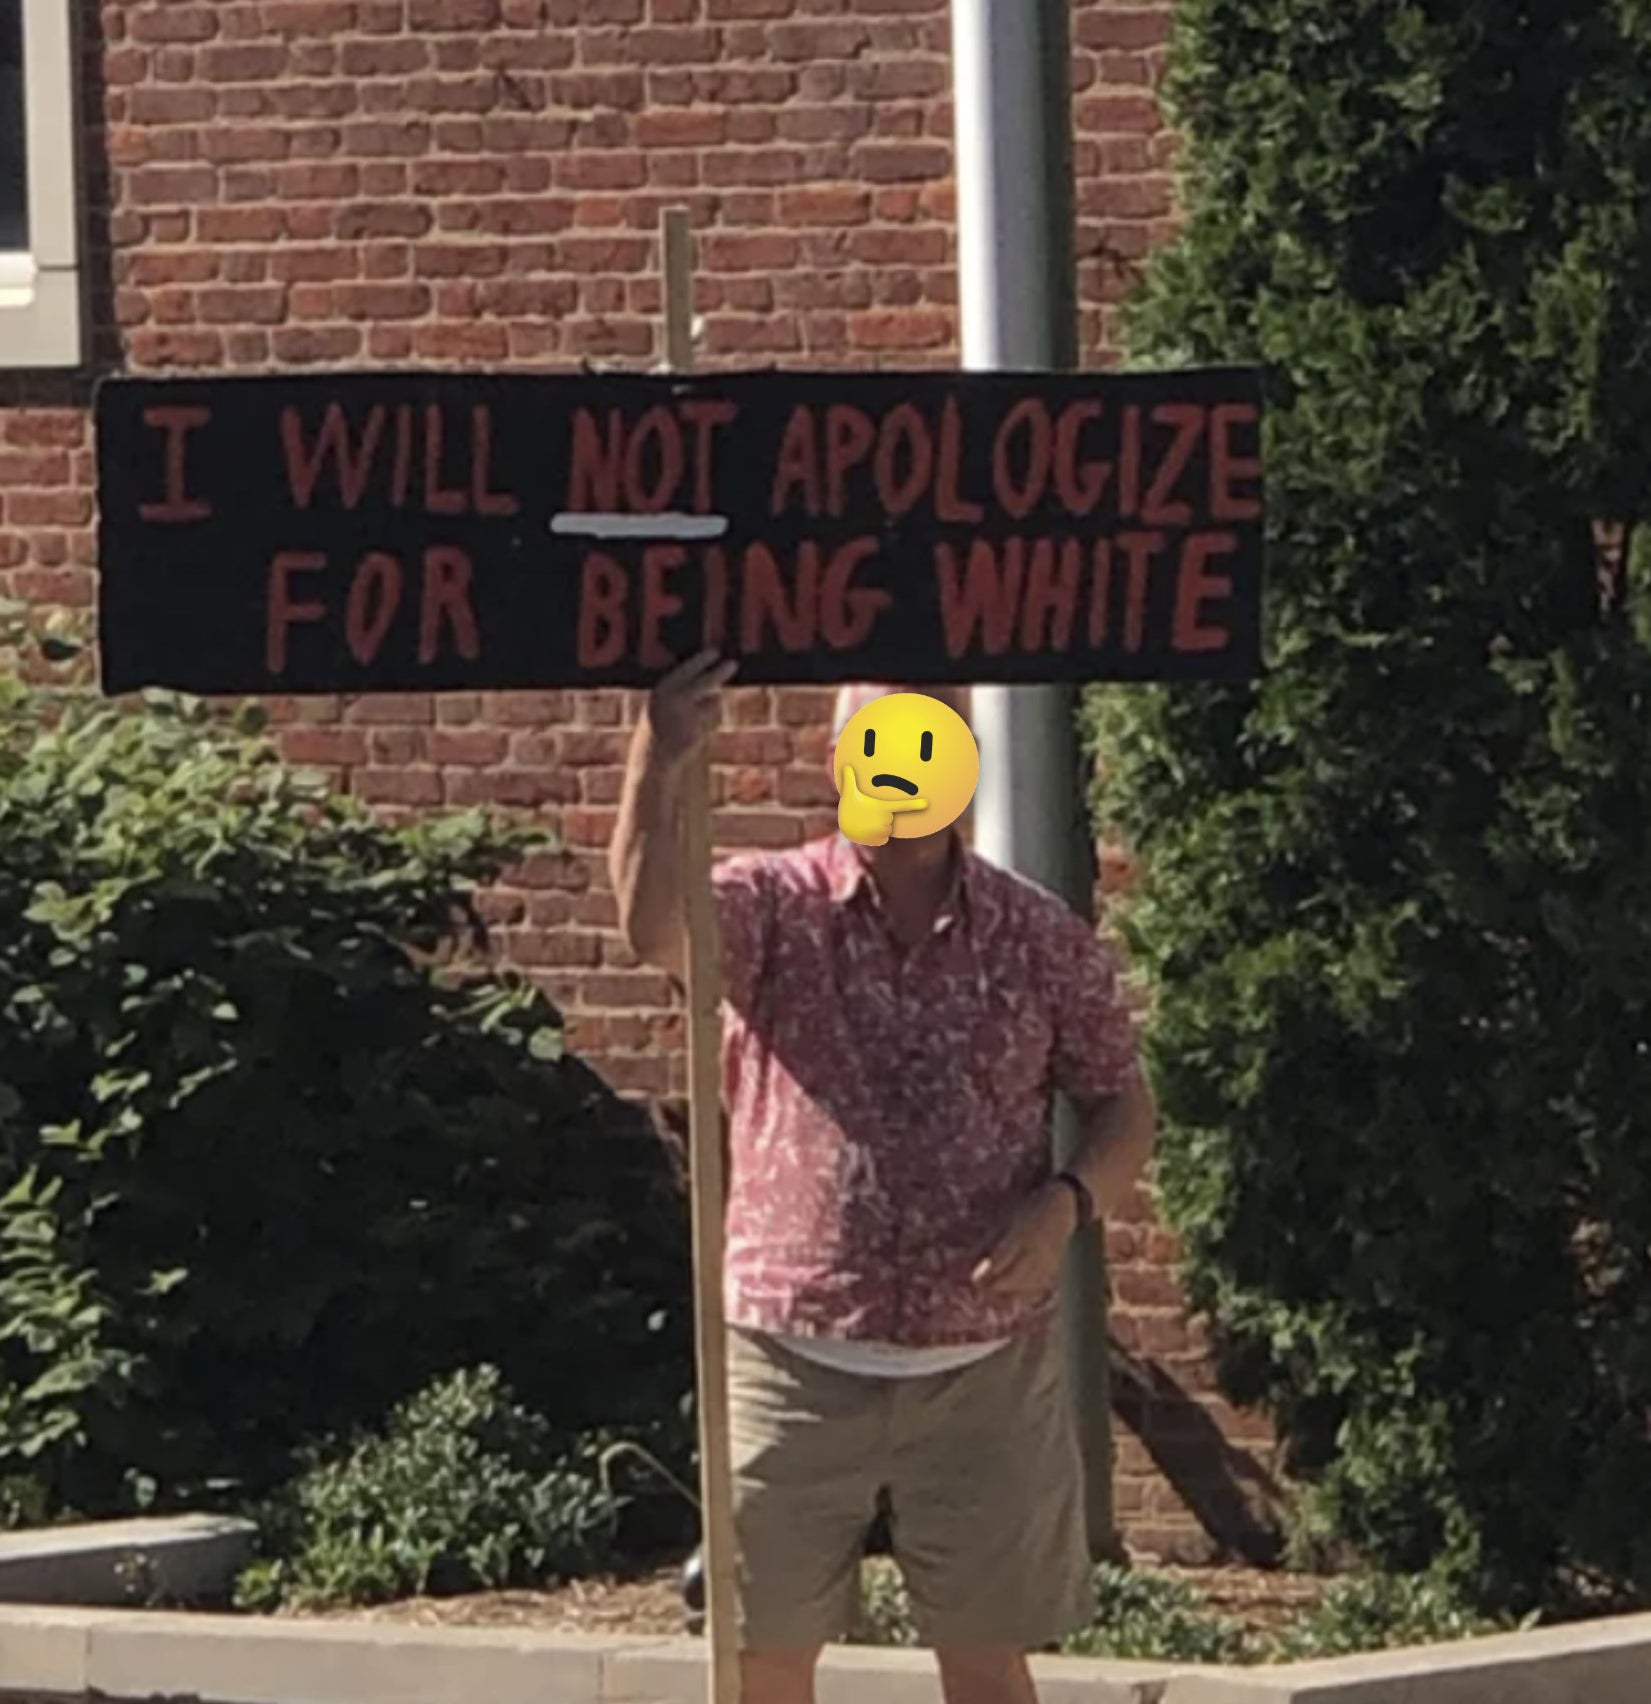 A man holding up a sign that says &quot;I will not apologize for being white&quot;